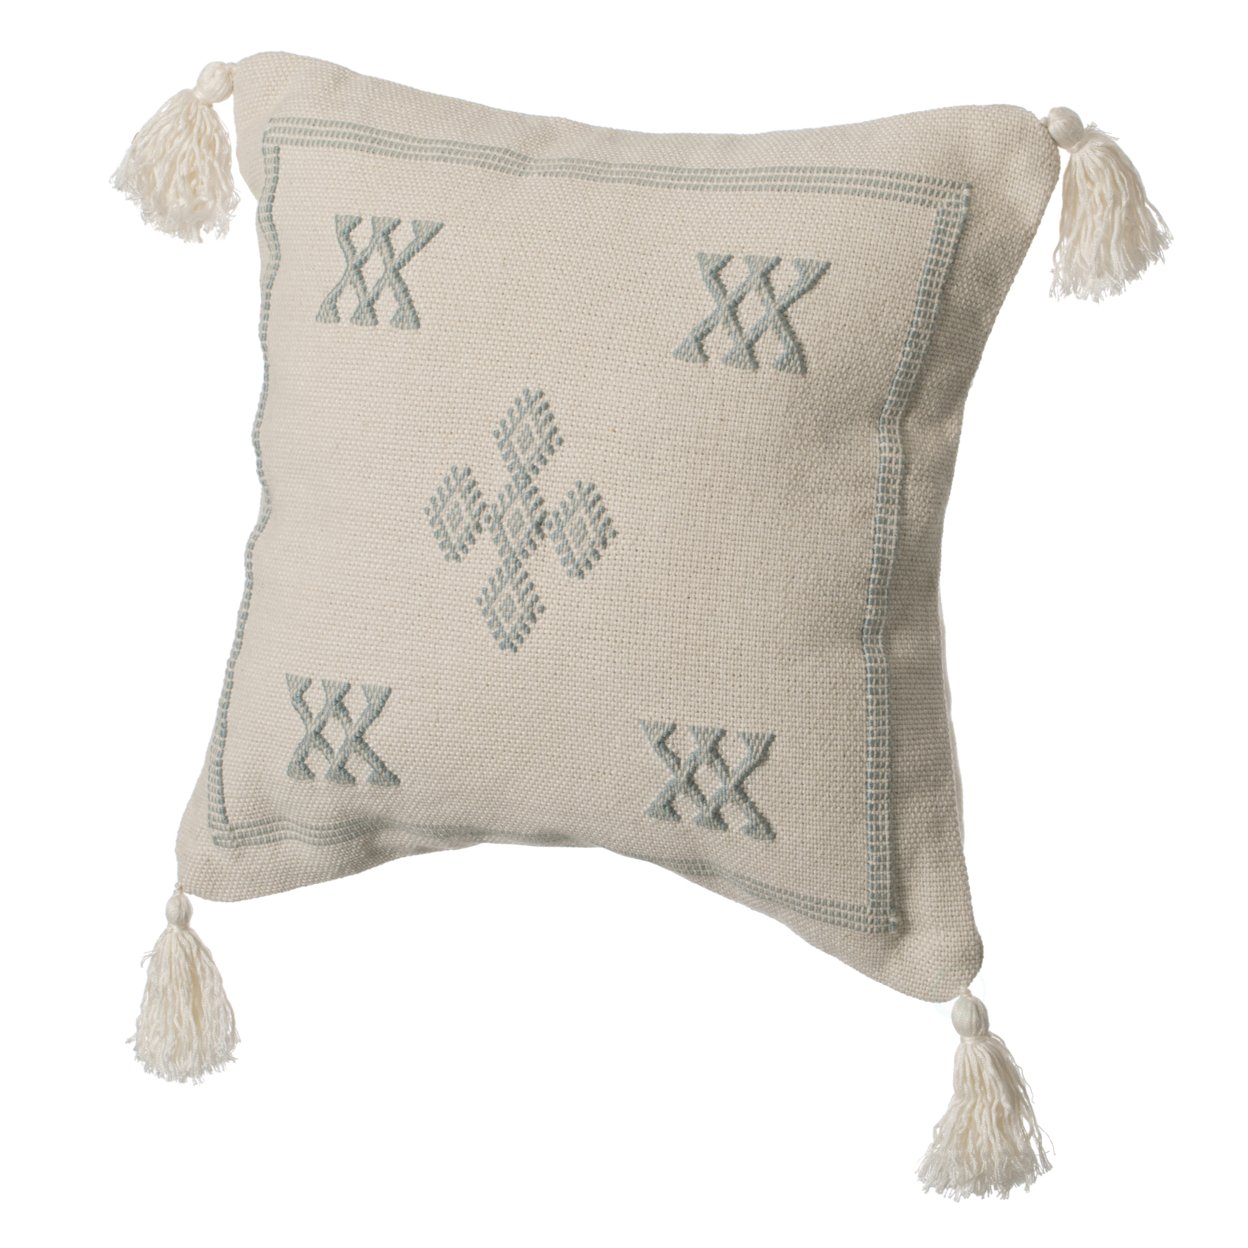 16 Throw Pillow Cover With Southwest Tribal Pattern And Corner Tassels - Grey